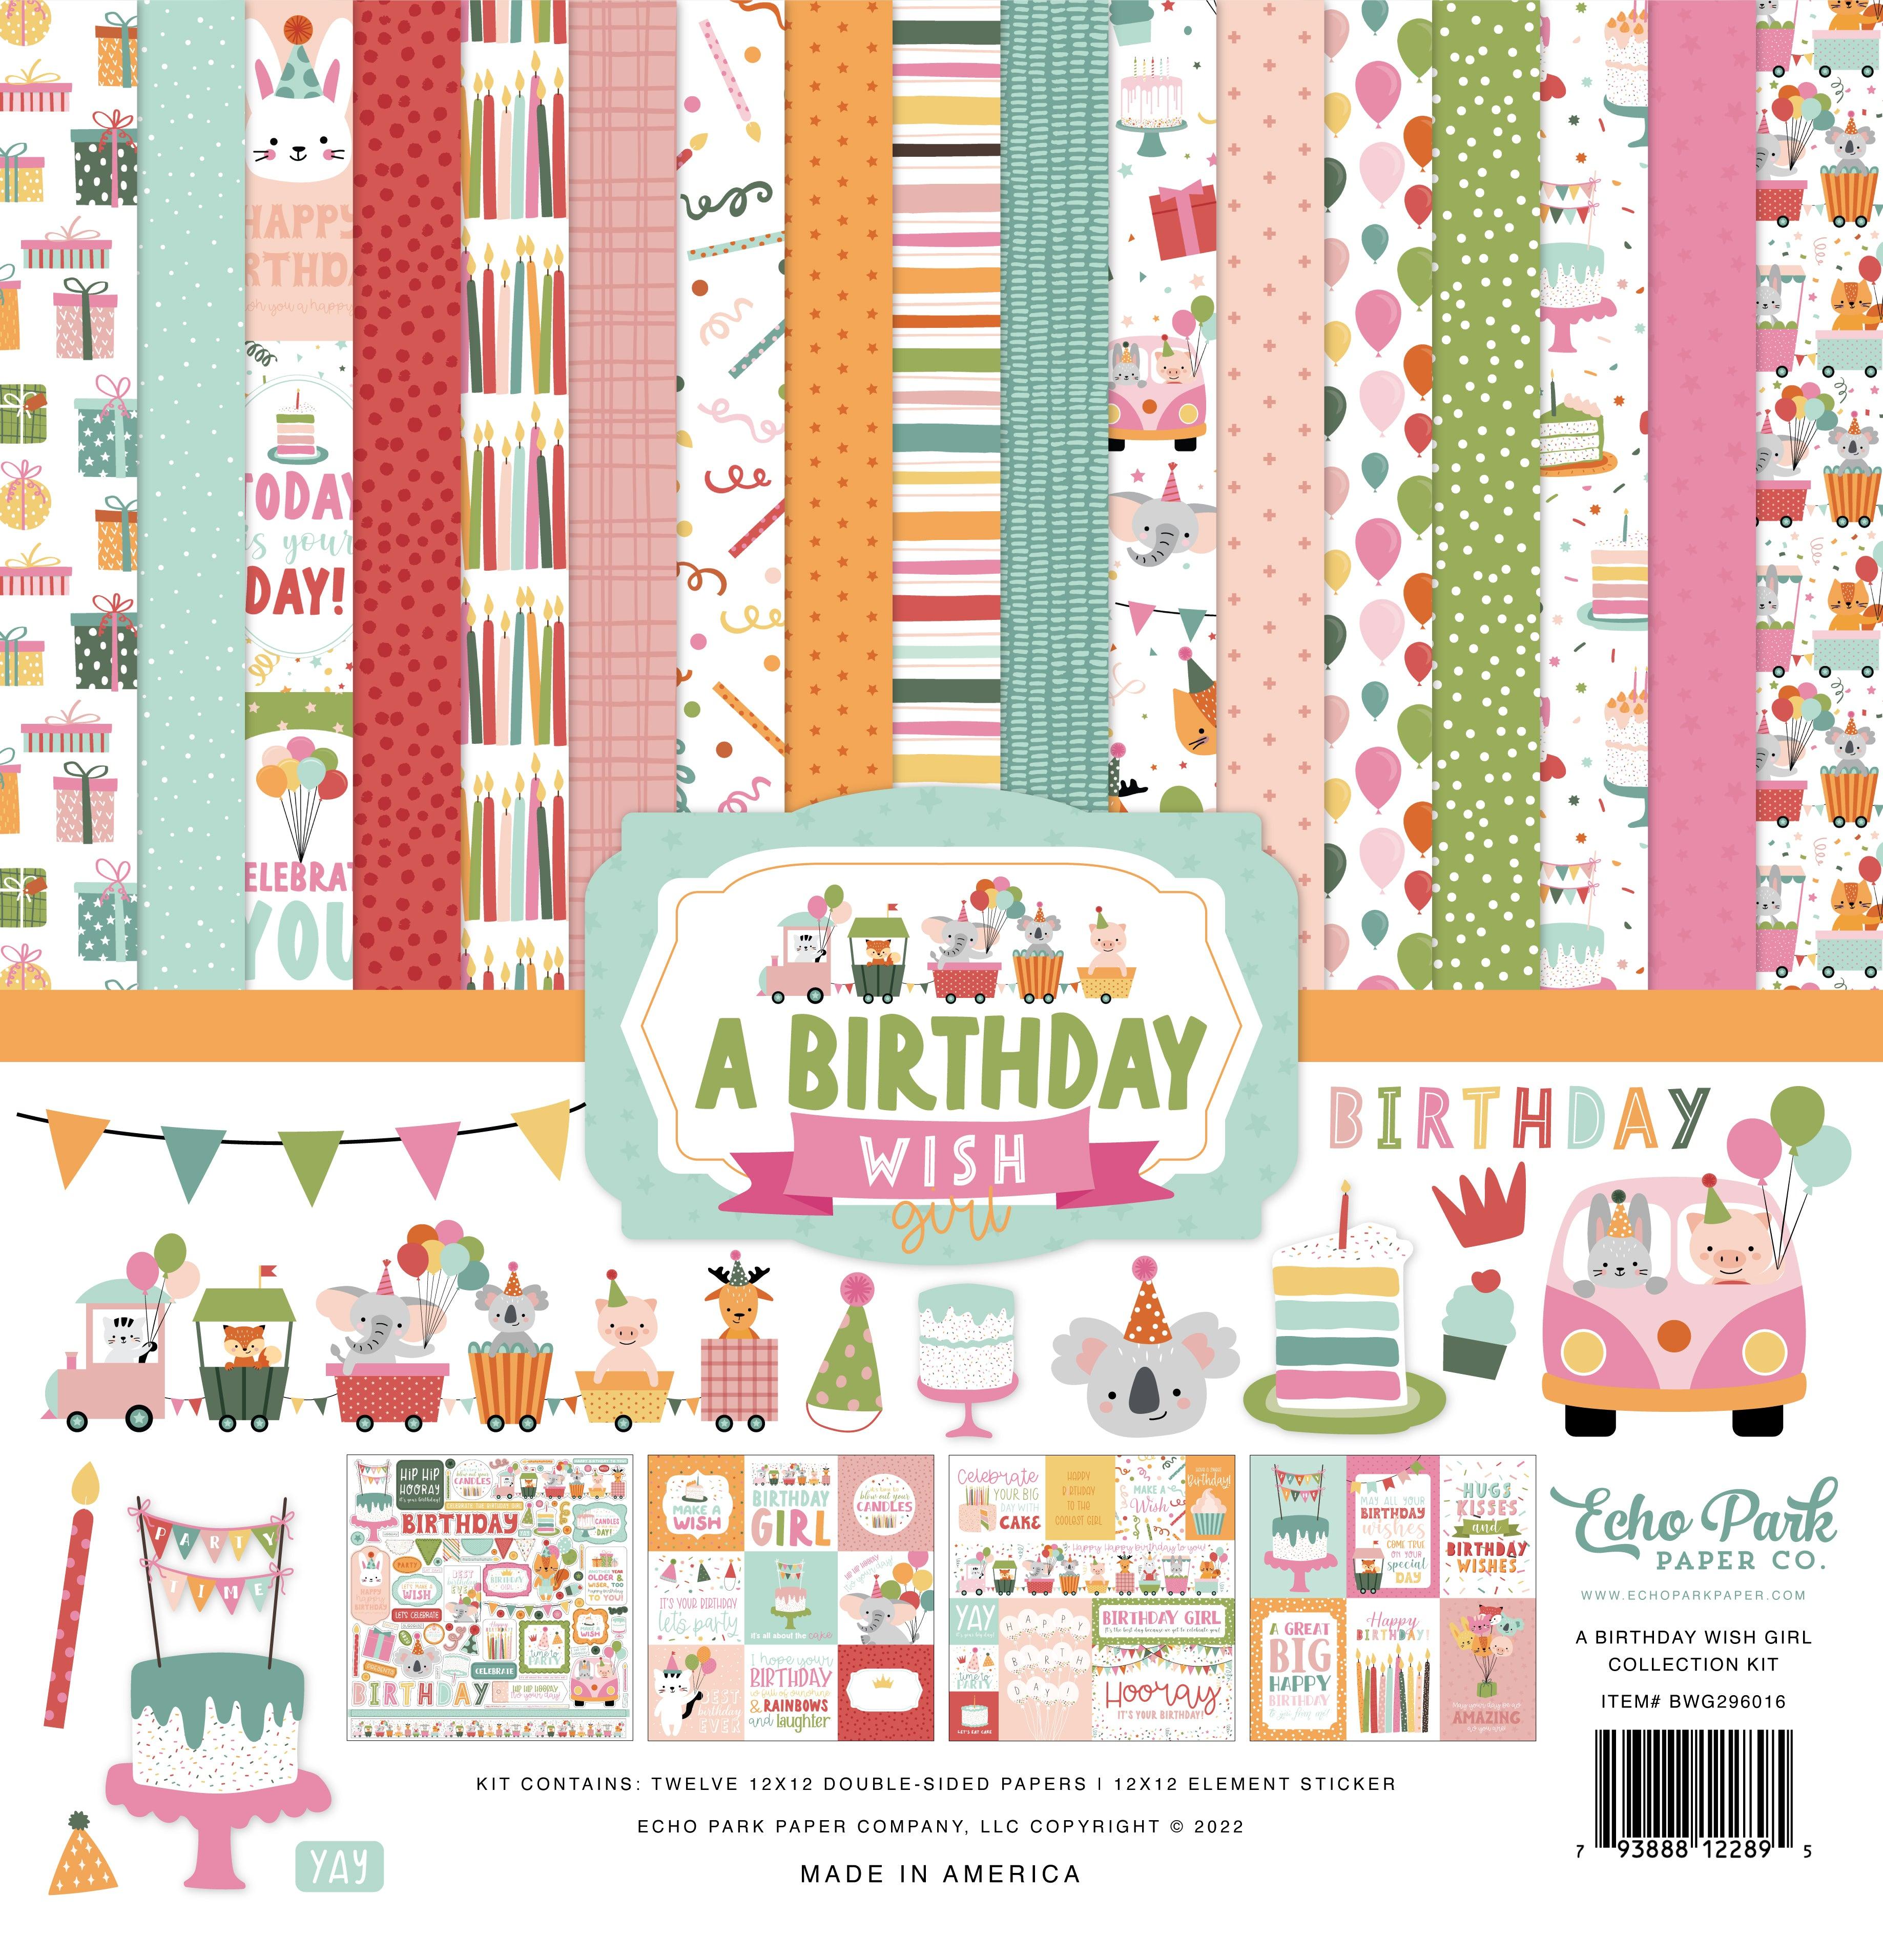 A Birthday Wish Girl Collection 12 x 12 Double-Sided Scrapbook Paper & Sticker Collection Kit by Echo Park Paper 